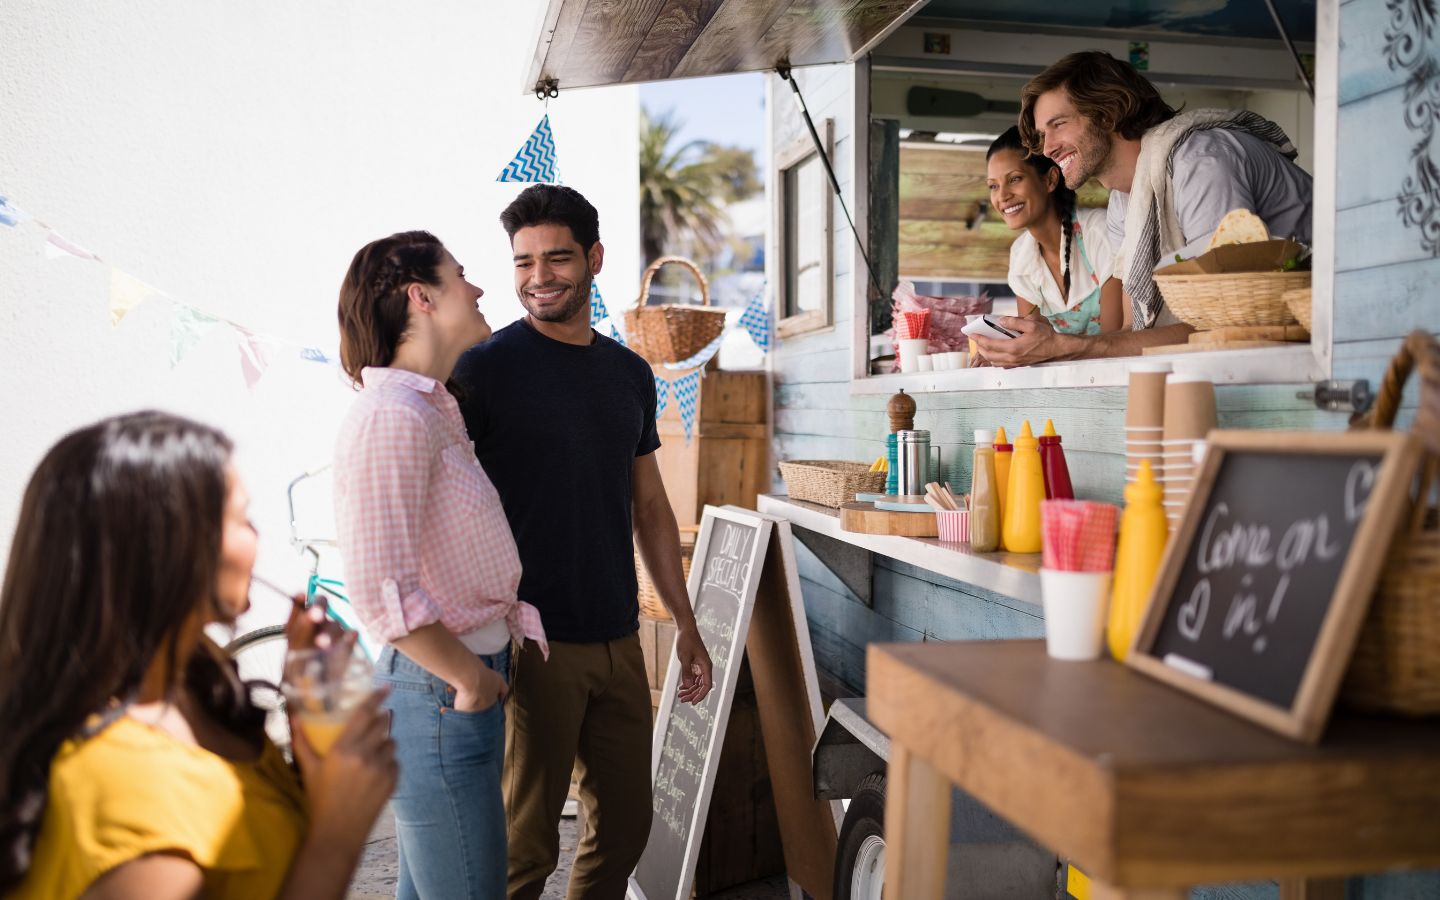 man and woman looking at each other about to place an order with another man and woman running a food truck while a woman waits in line nearby